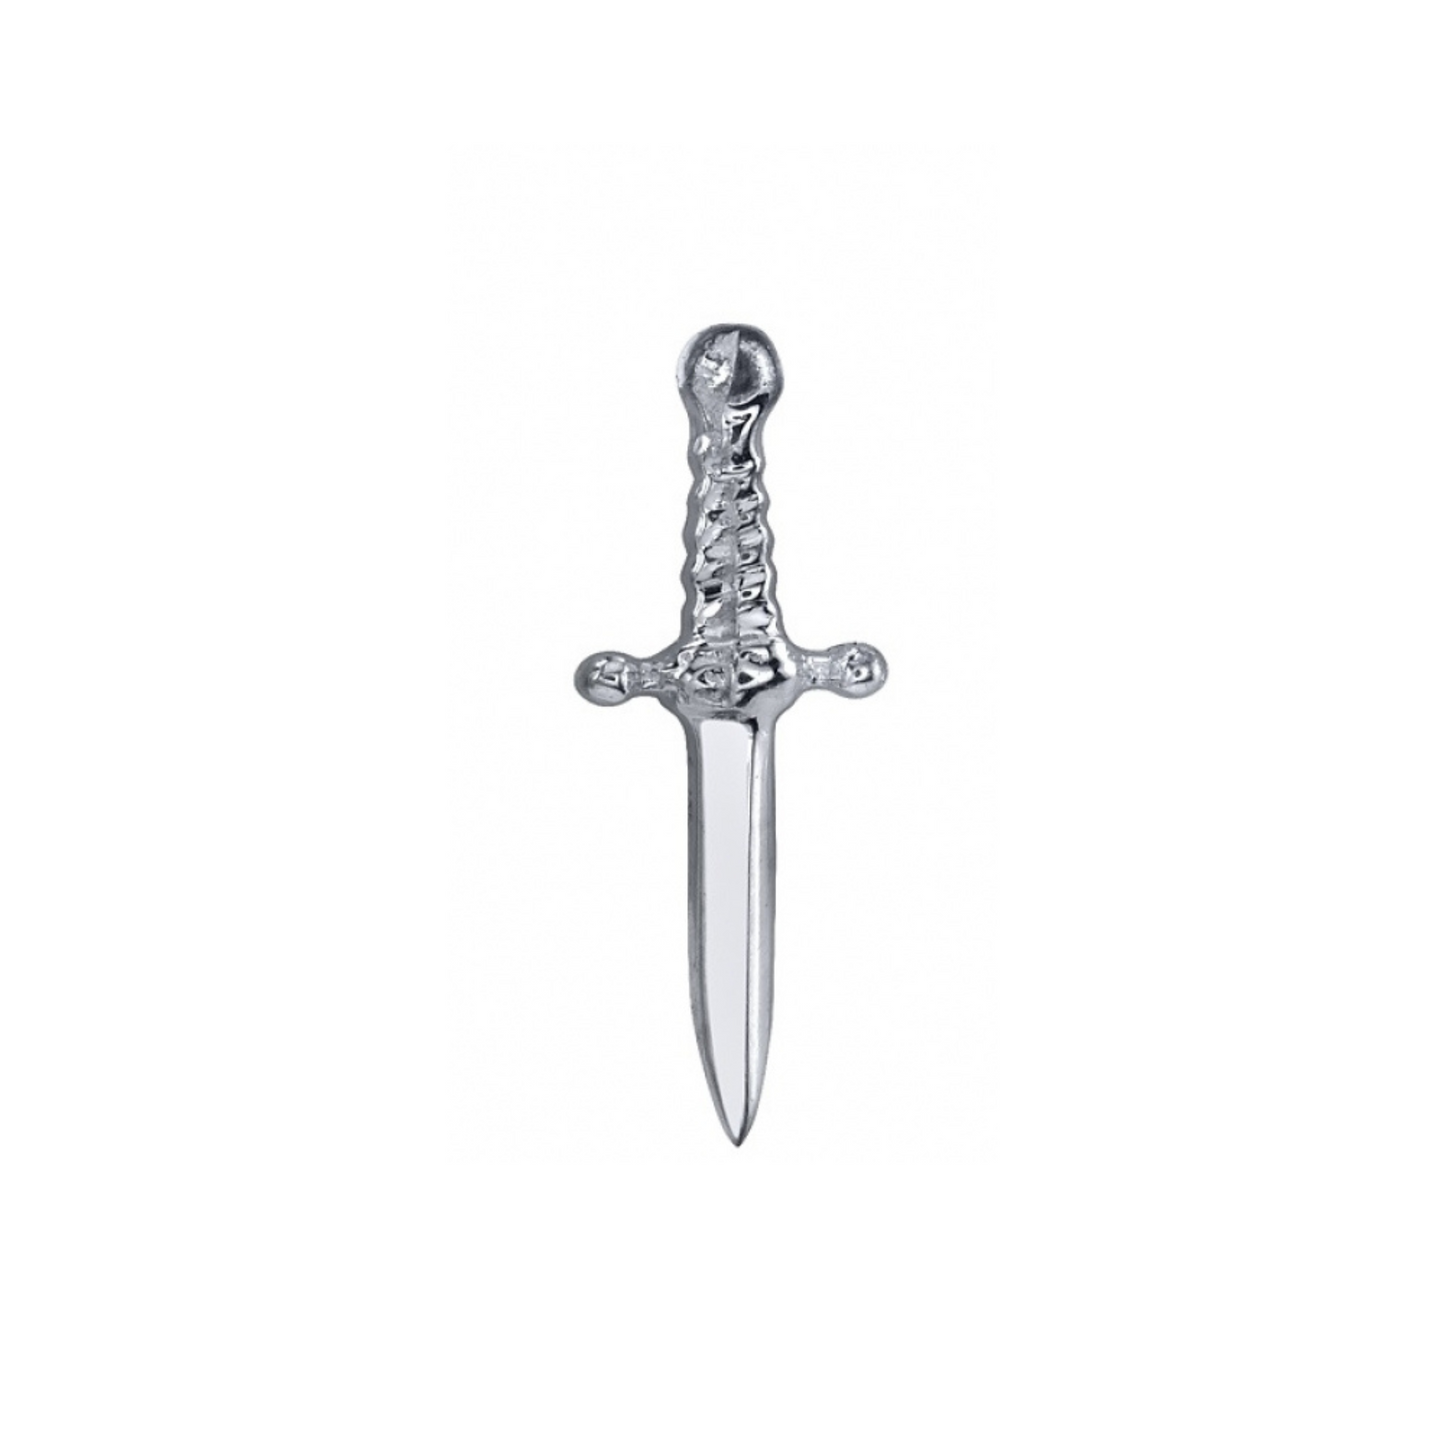 pear clipart png dagger